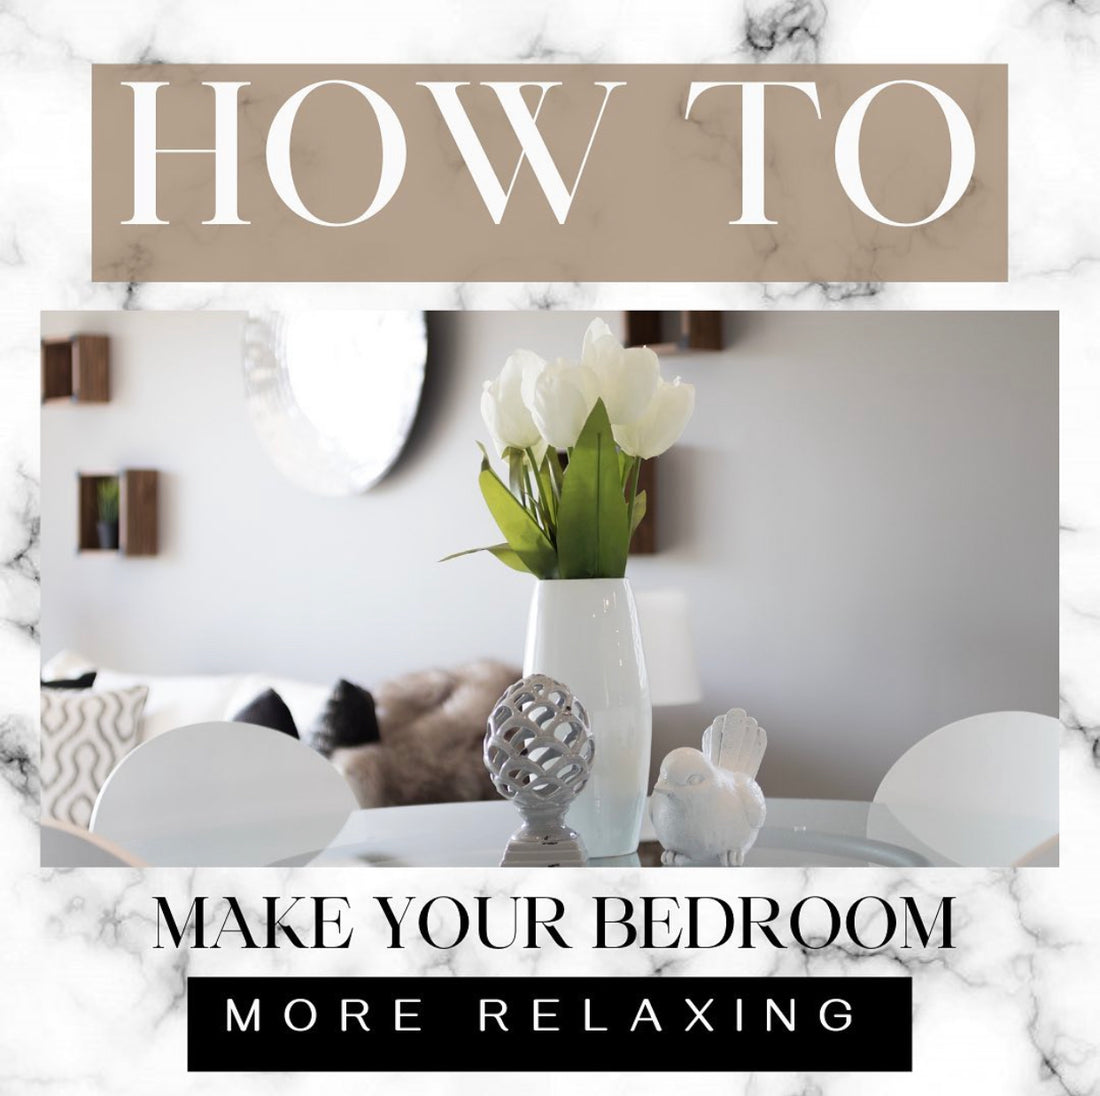 How to Make Your Bedroom More Relaxing